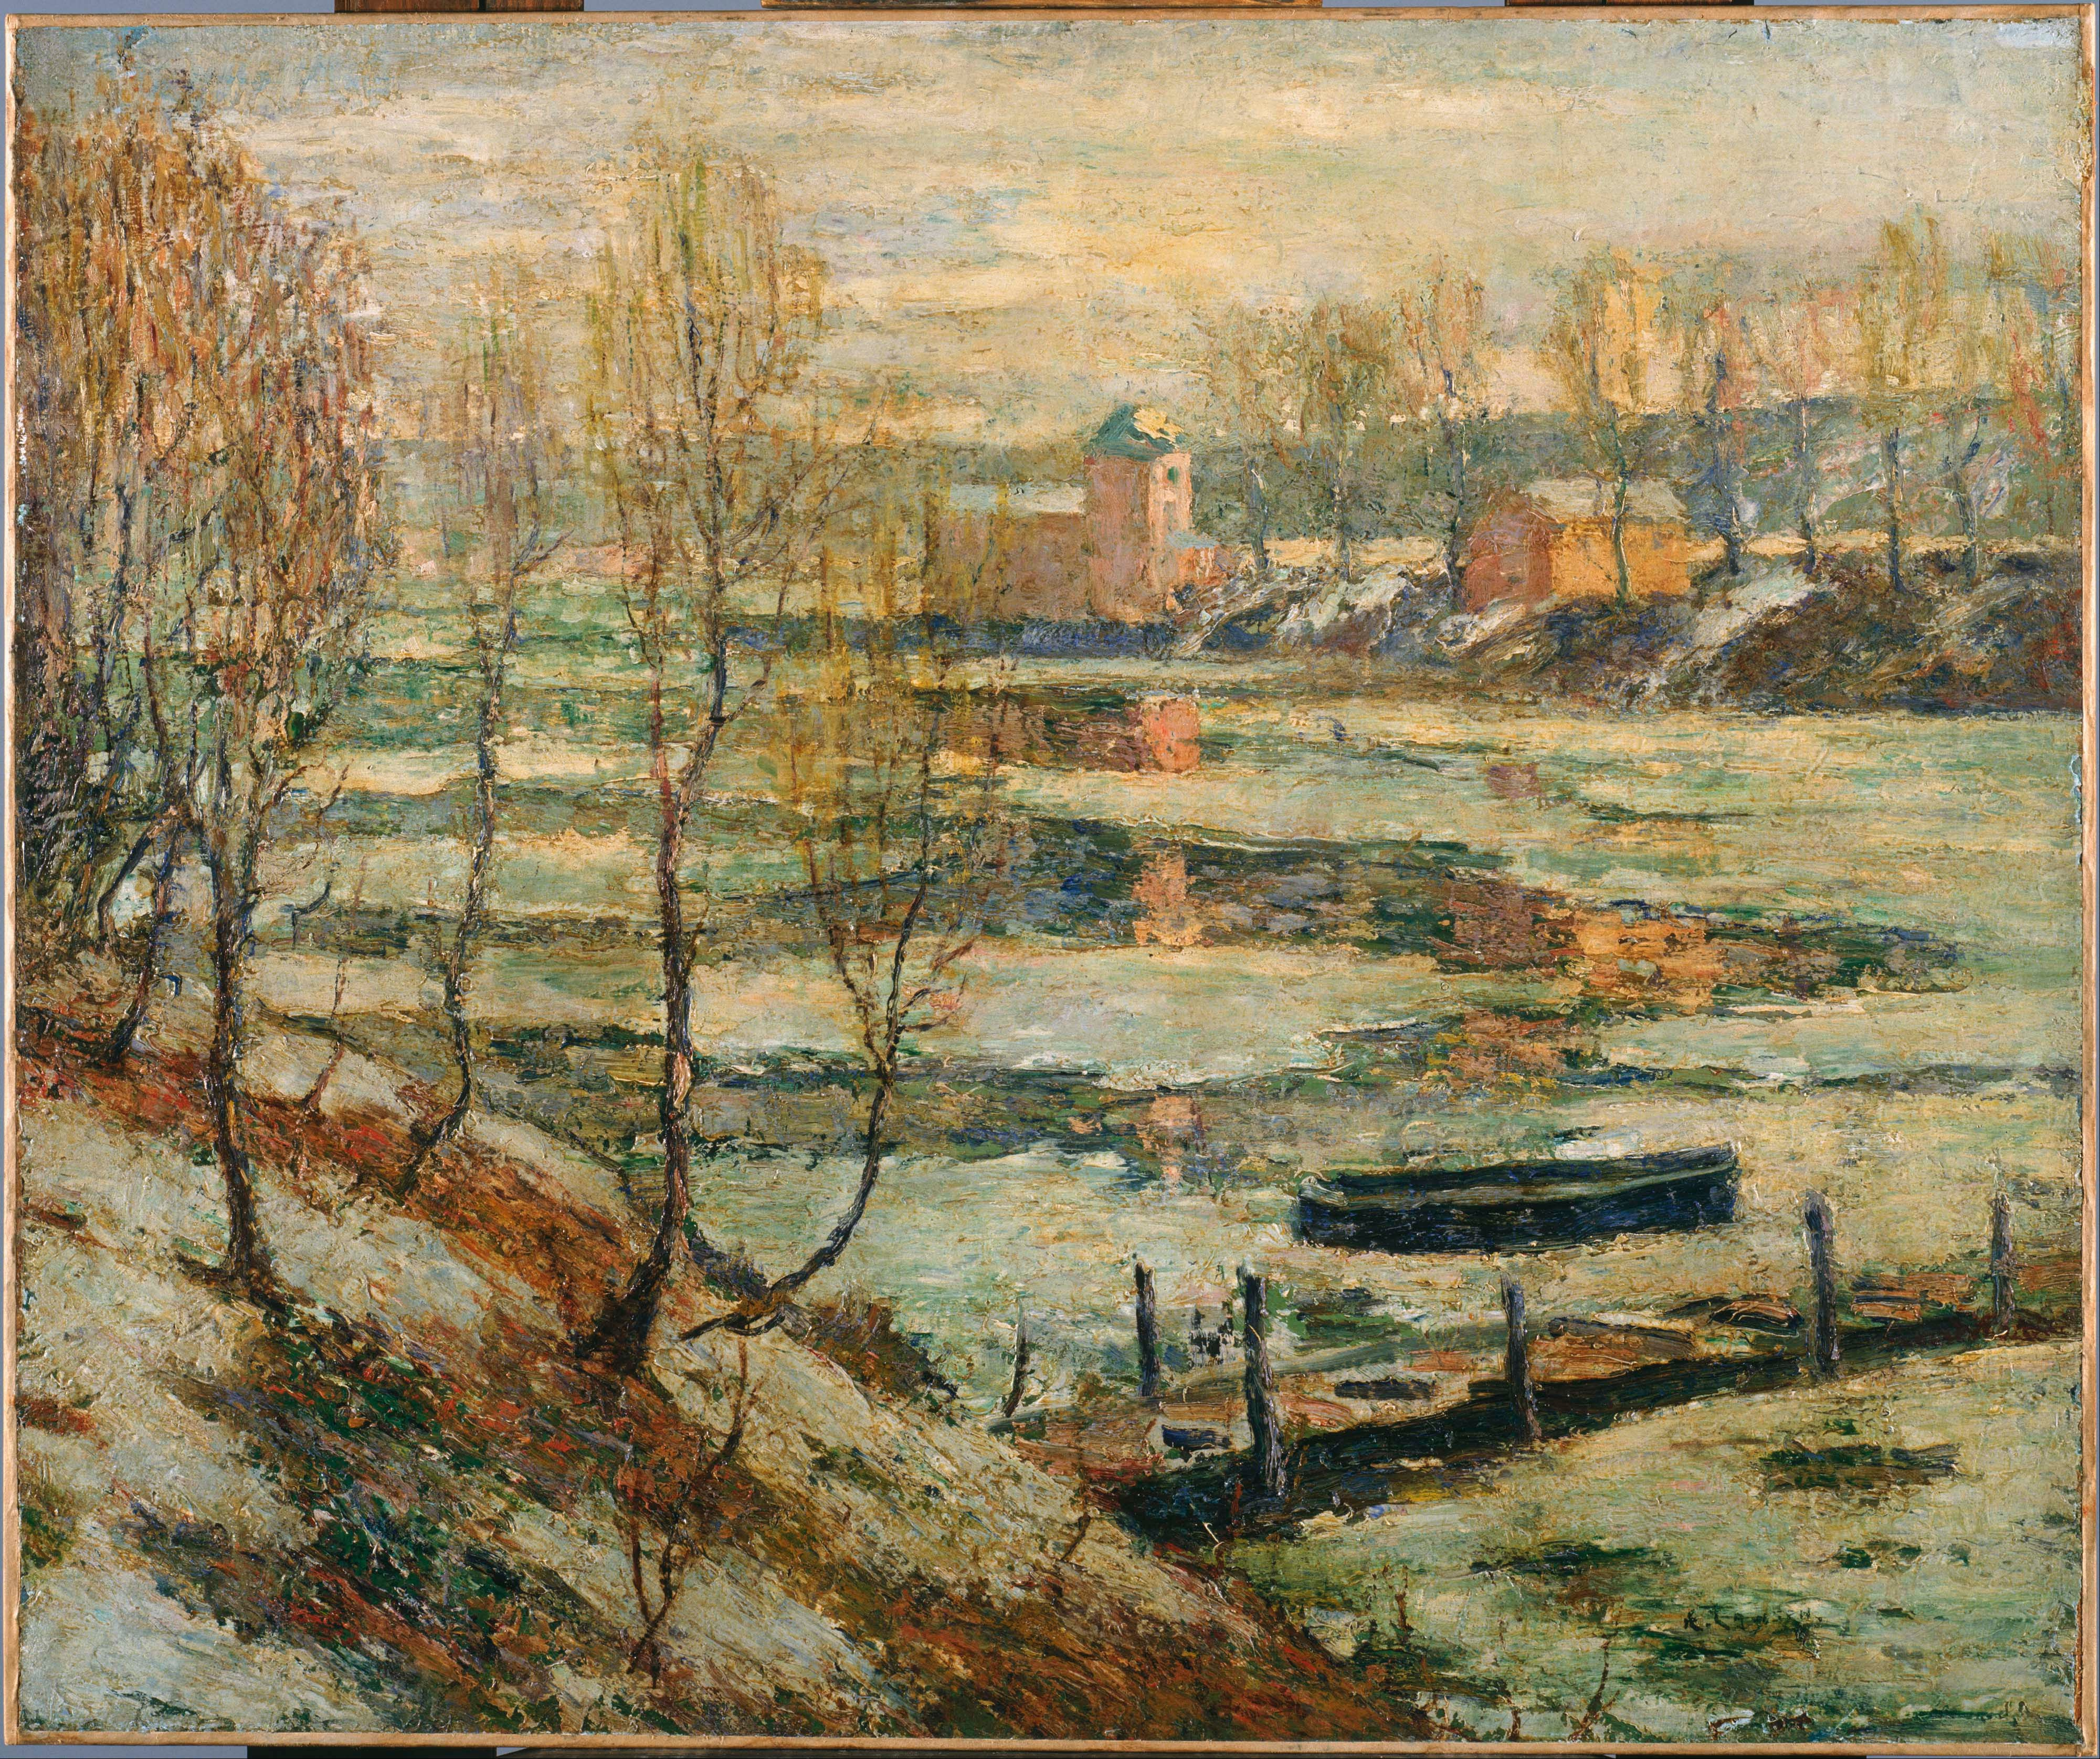 Ernest Lawson - Ice in the River - Google Art Project